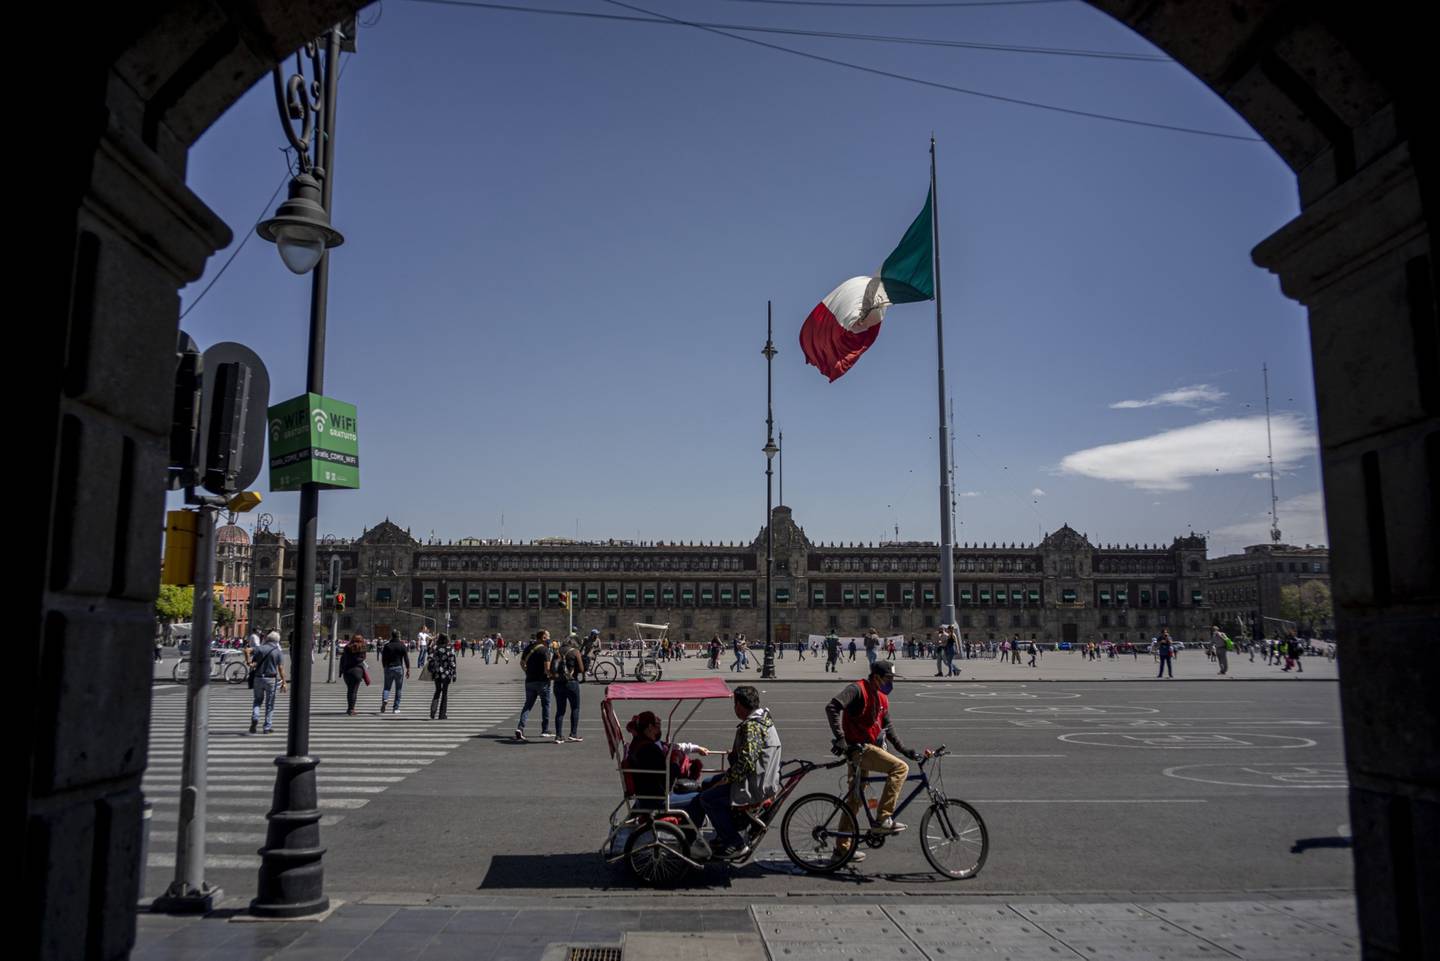 México and Central America's trade is increasing as Mexico's President Andrés Manuel López Obrador visits the region.